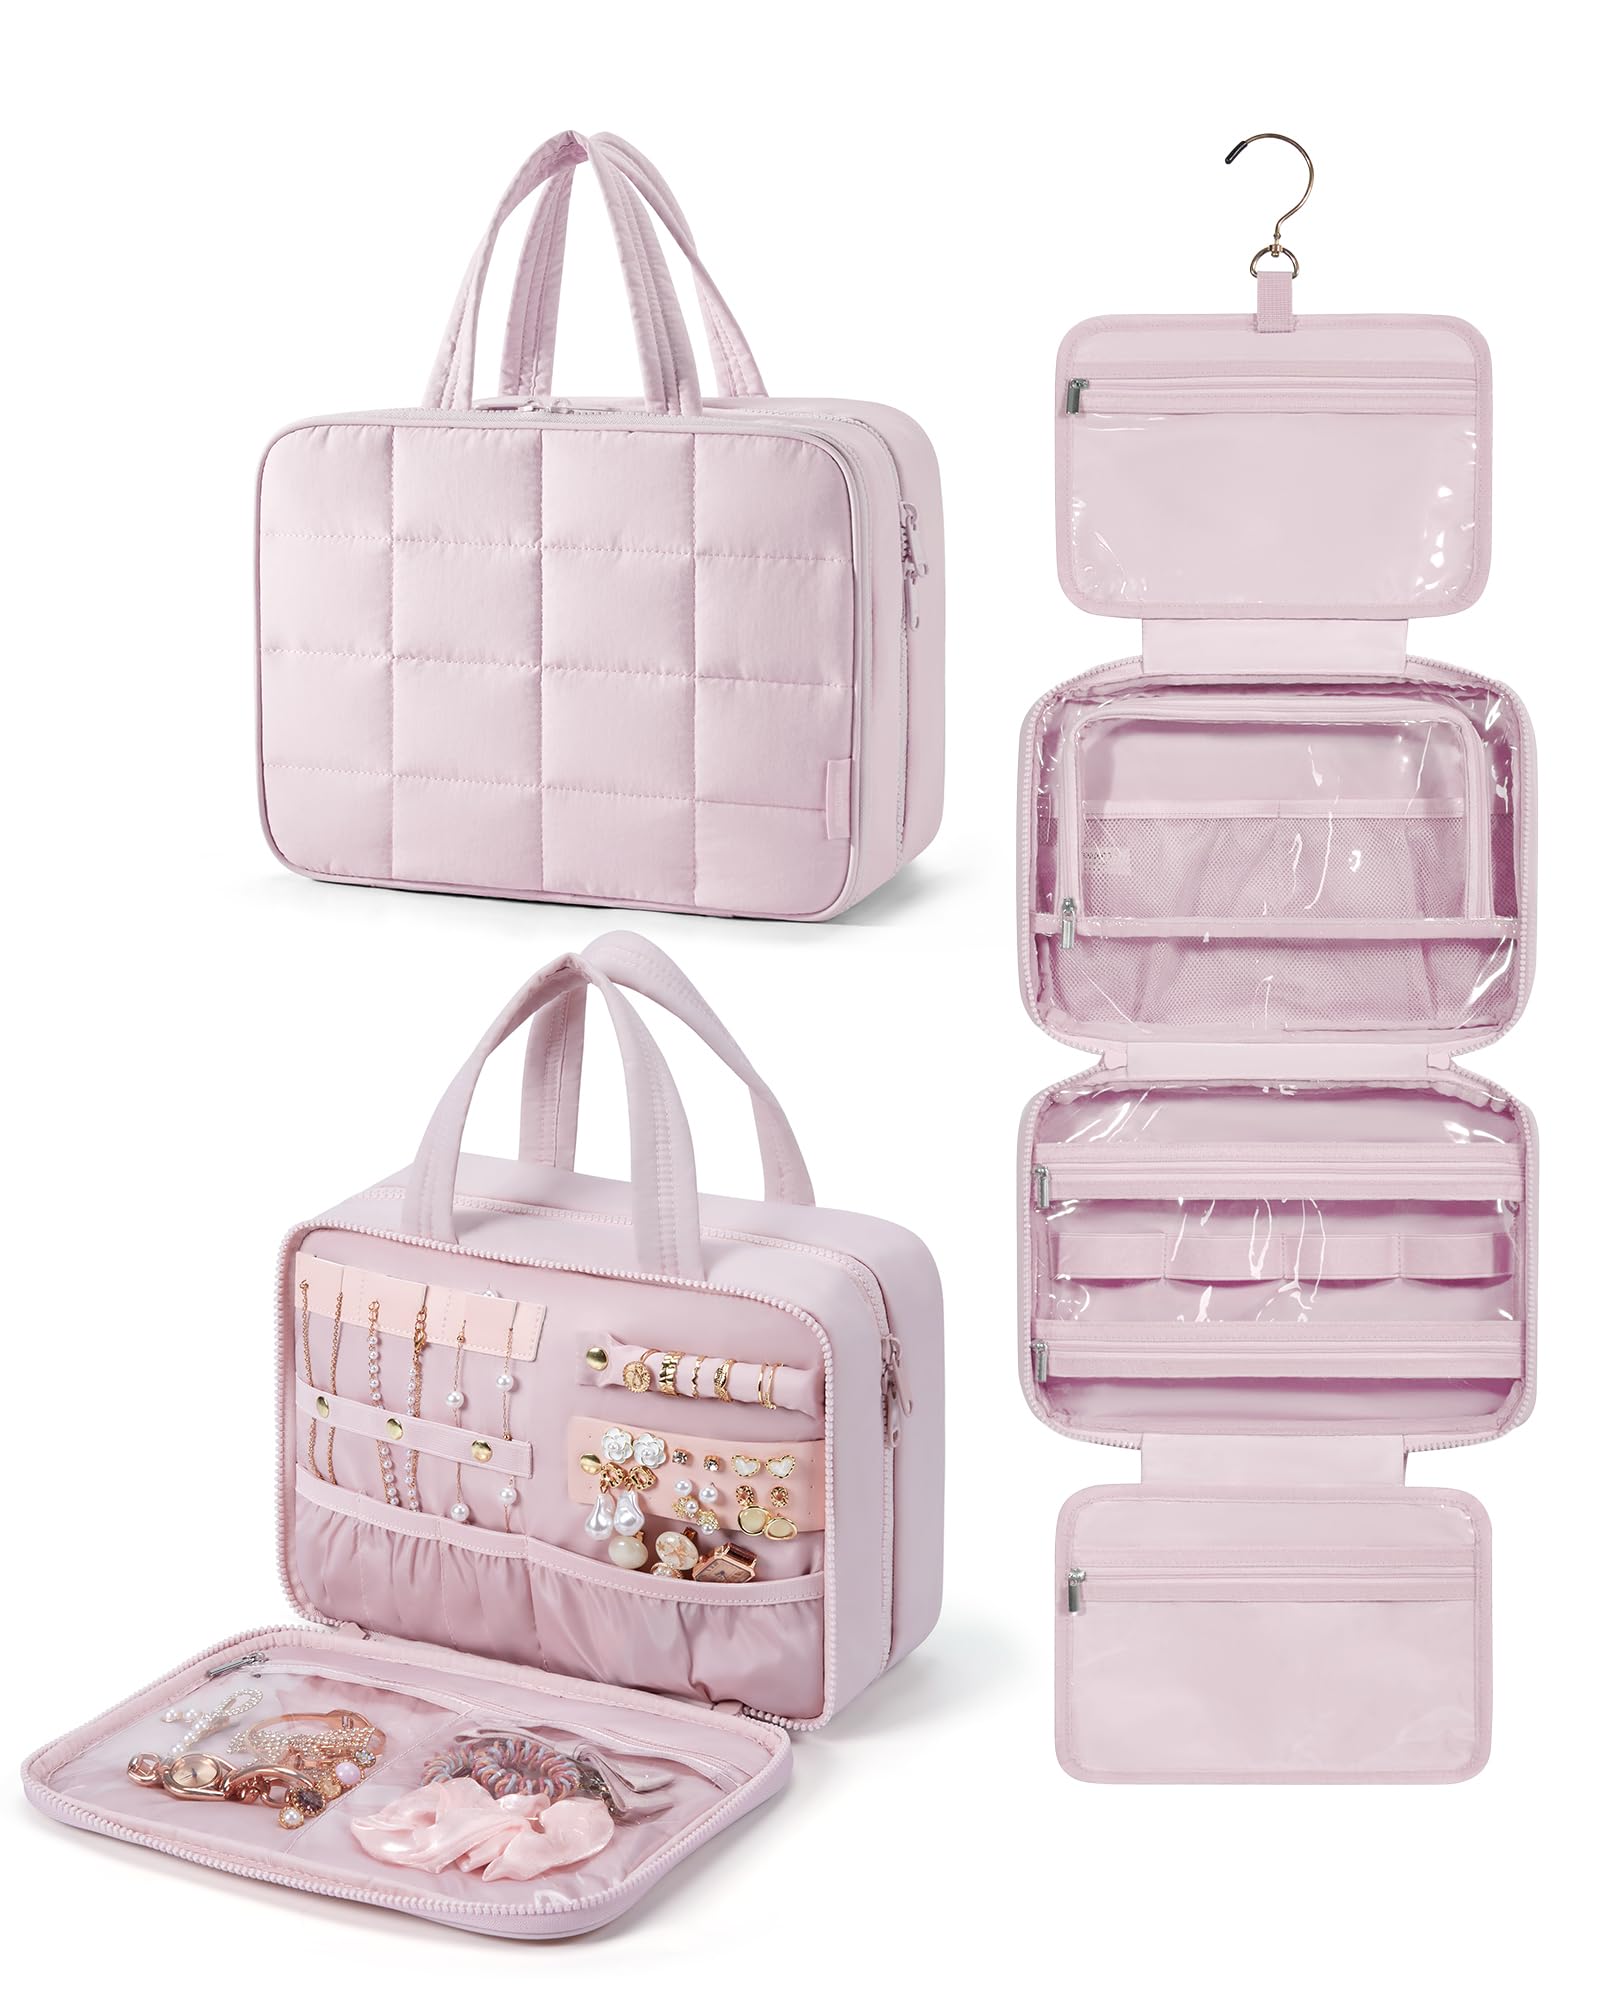 Travel Toiletry Bag with Jewelry Organizer Hanging Travel Bag for Toiletries Puffy Makeup Cosmetic Bag Organizer